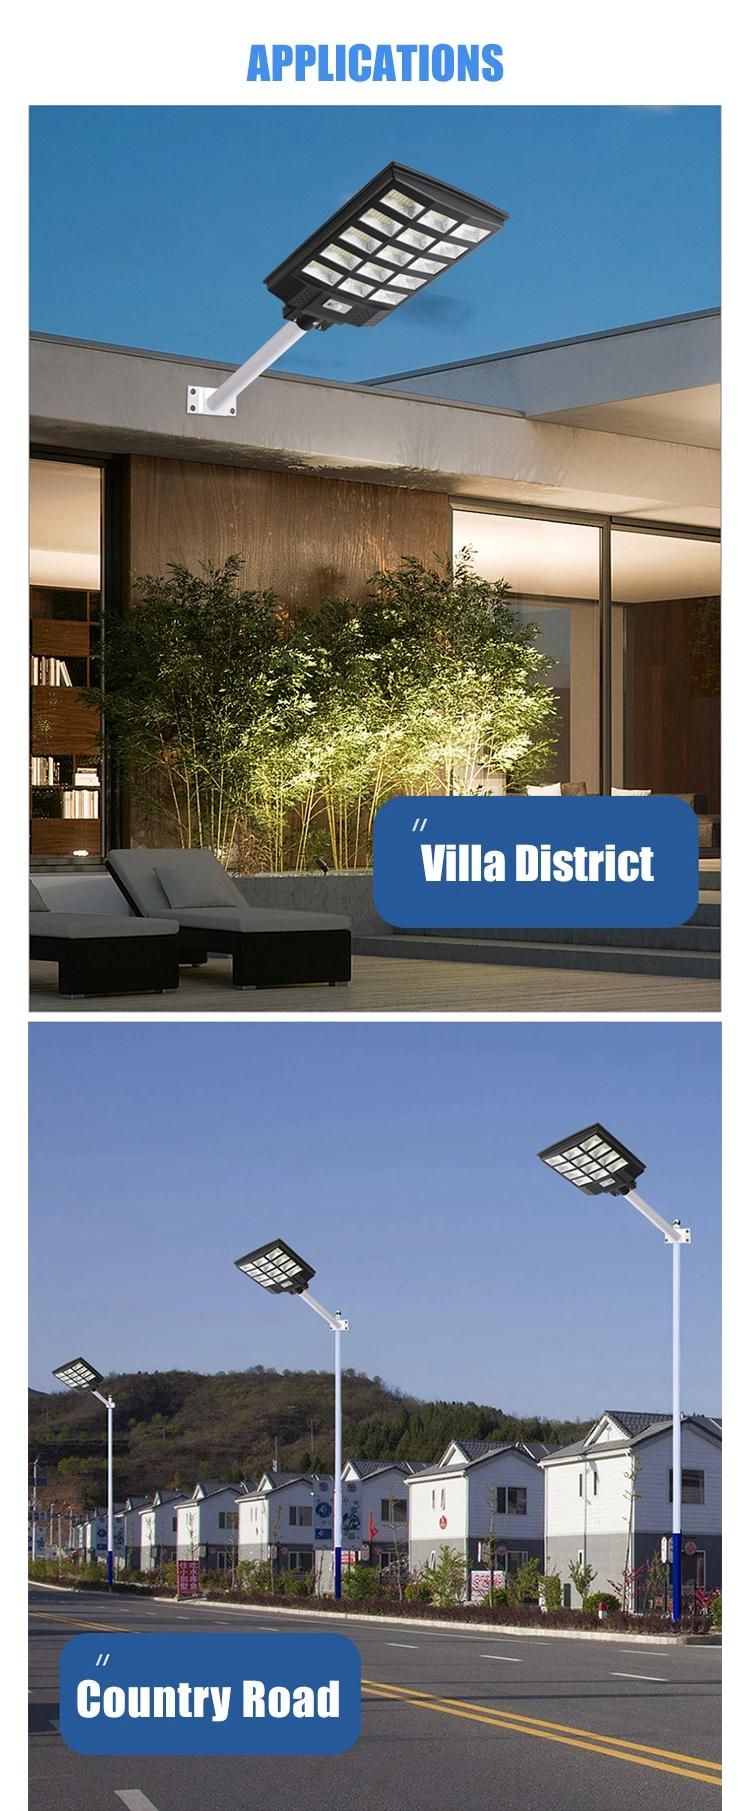 All in One Outdoor 600W LED Lamp Wall Mount Road Manufacturer Factory Wholesale Motion Solar Street Light